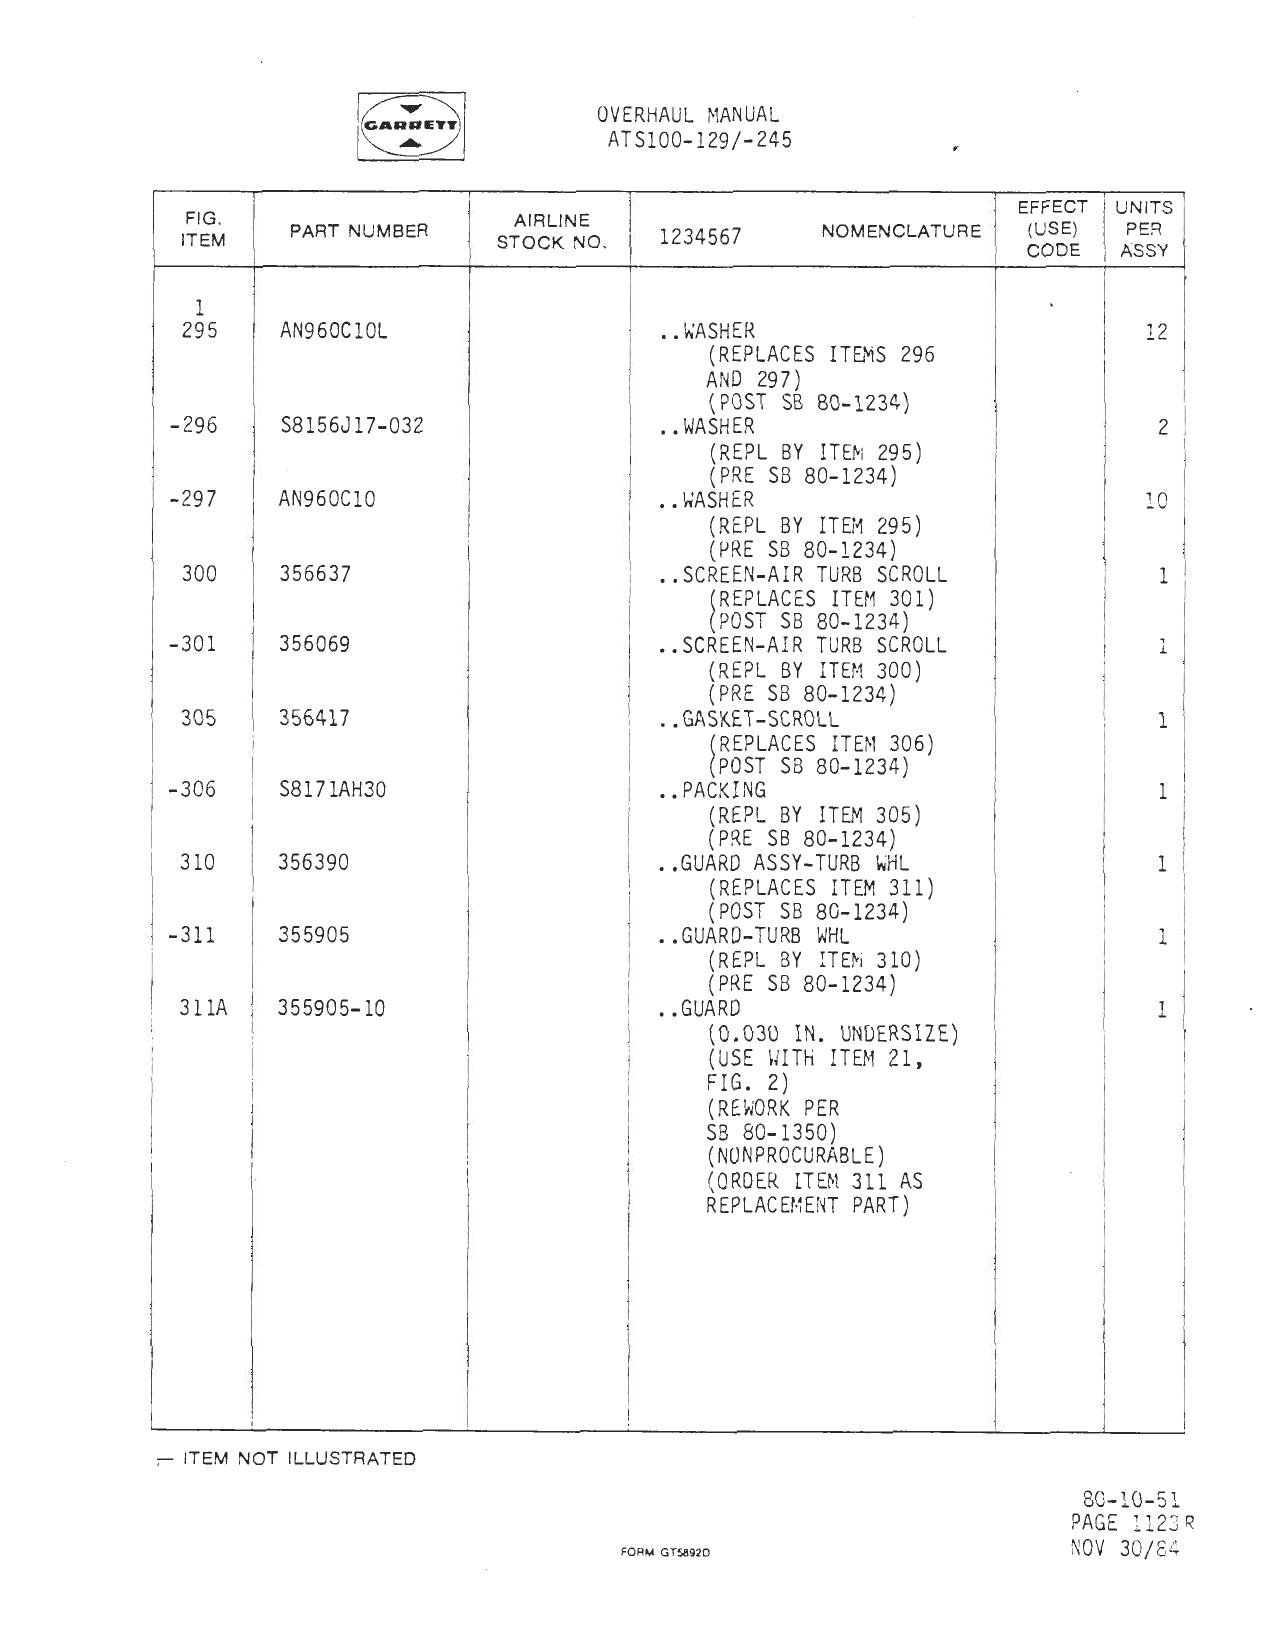 Sample page 8 from AirCorps Library document: Overhaul Manual with Illustrated Parts List for Air Turbine Engine Starter ~ INCOMPLETE